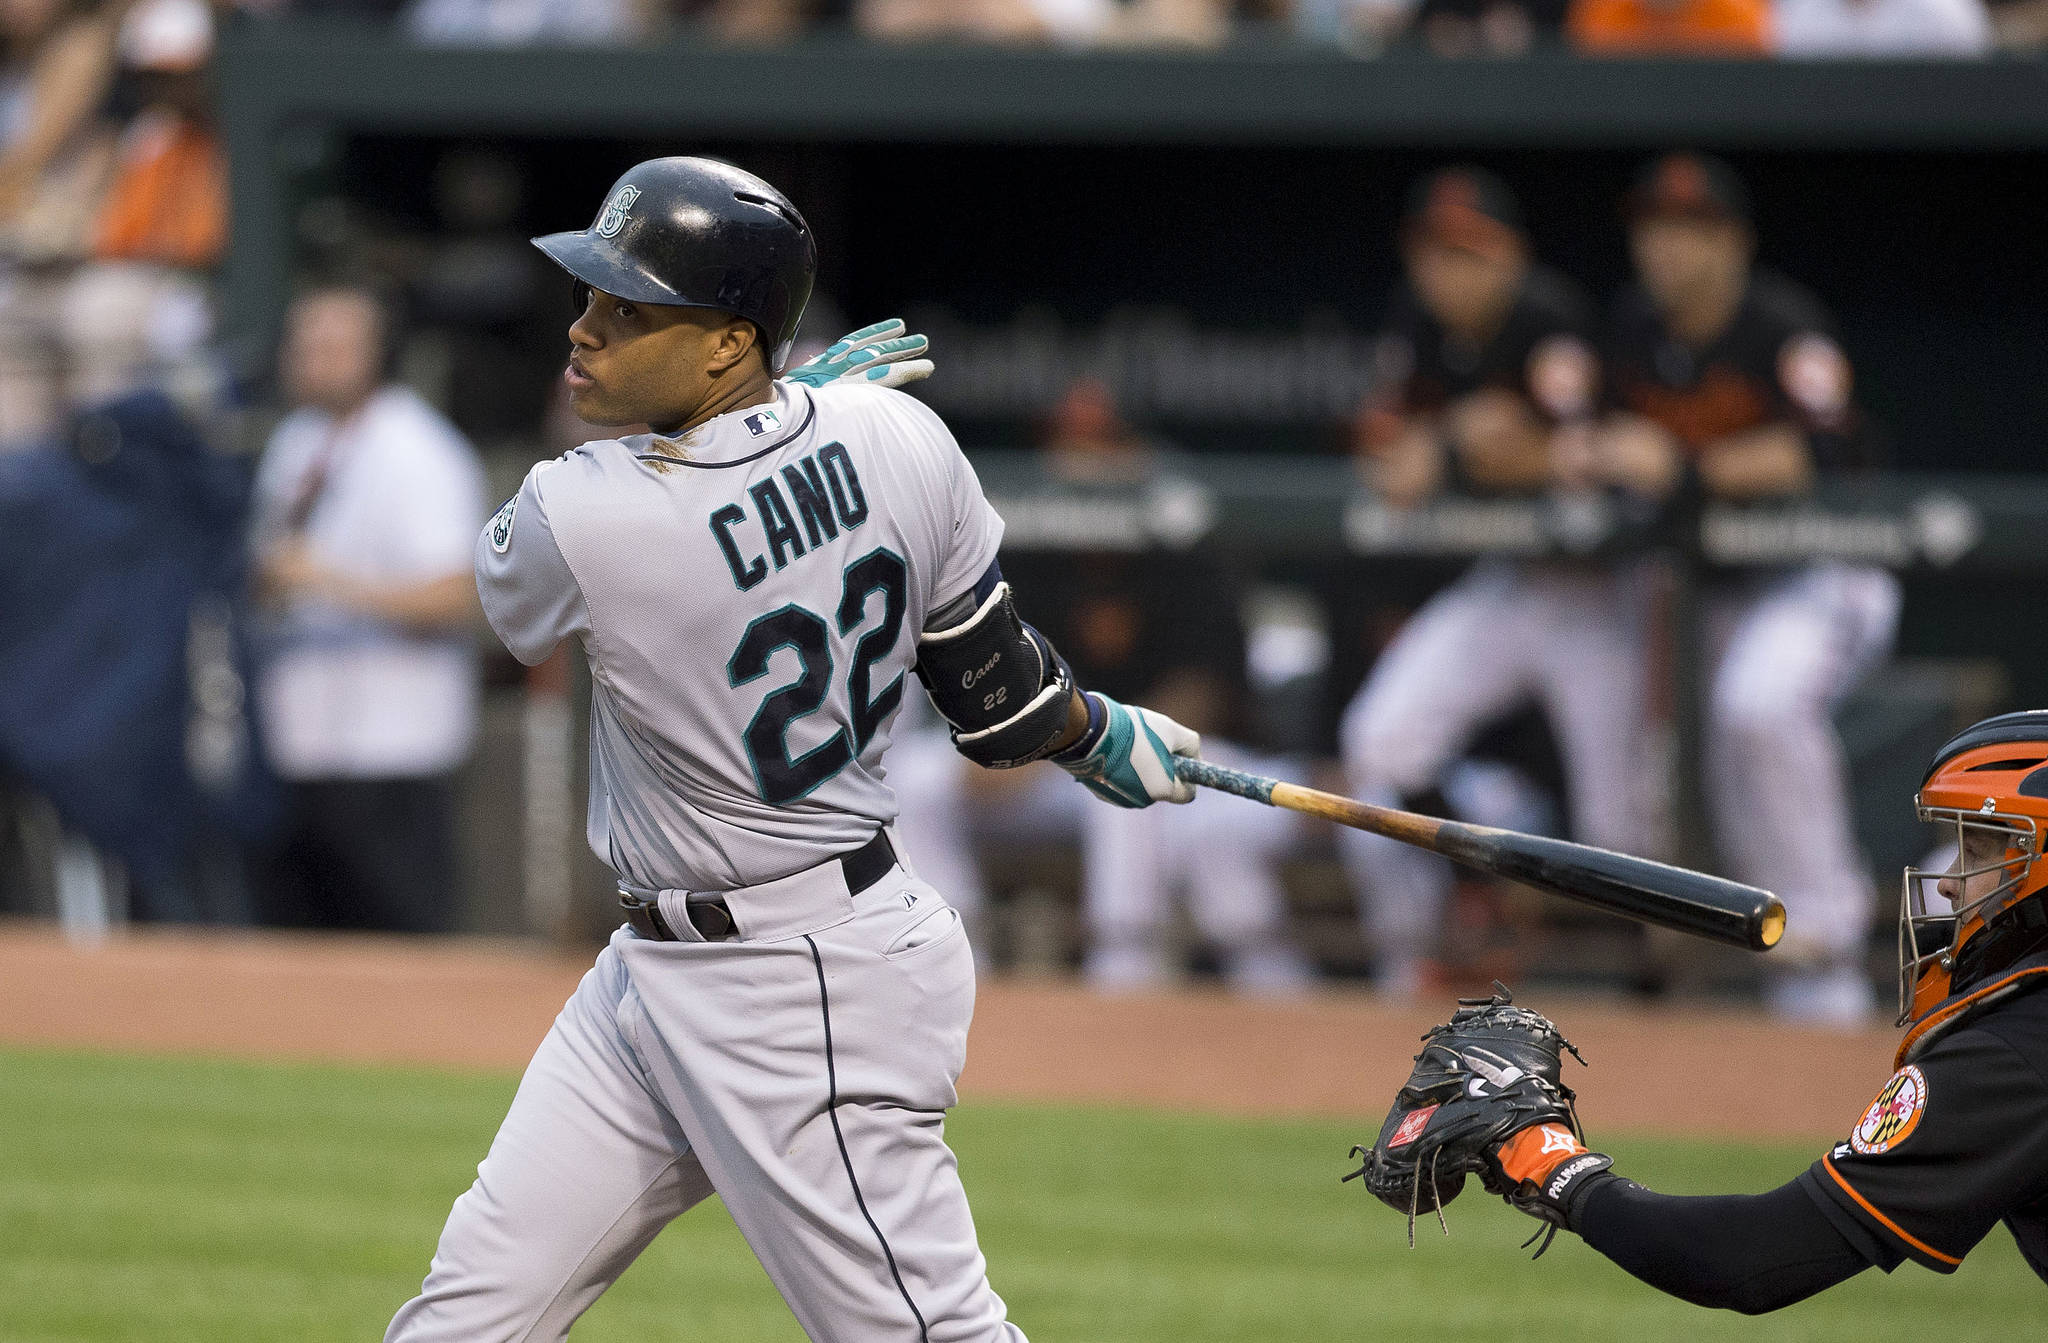 Robinson Cano still seeks his first playoff appearance as a Mariner. Photo by Keith Allison/Flickr